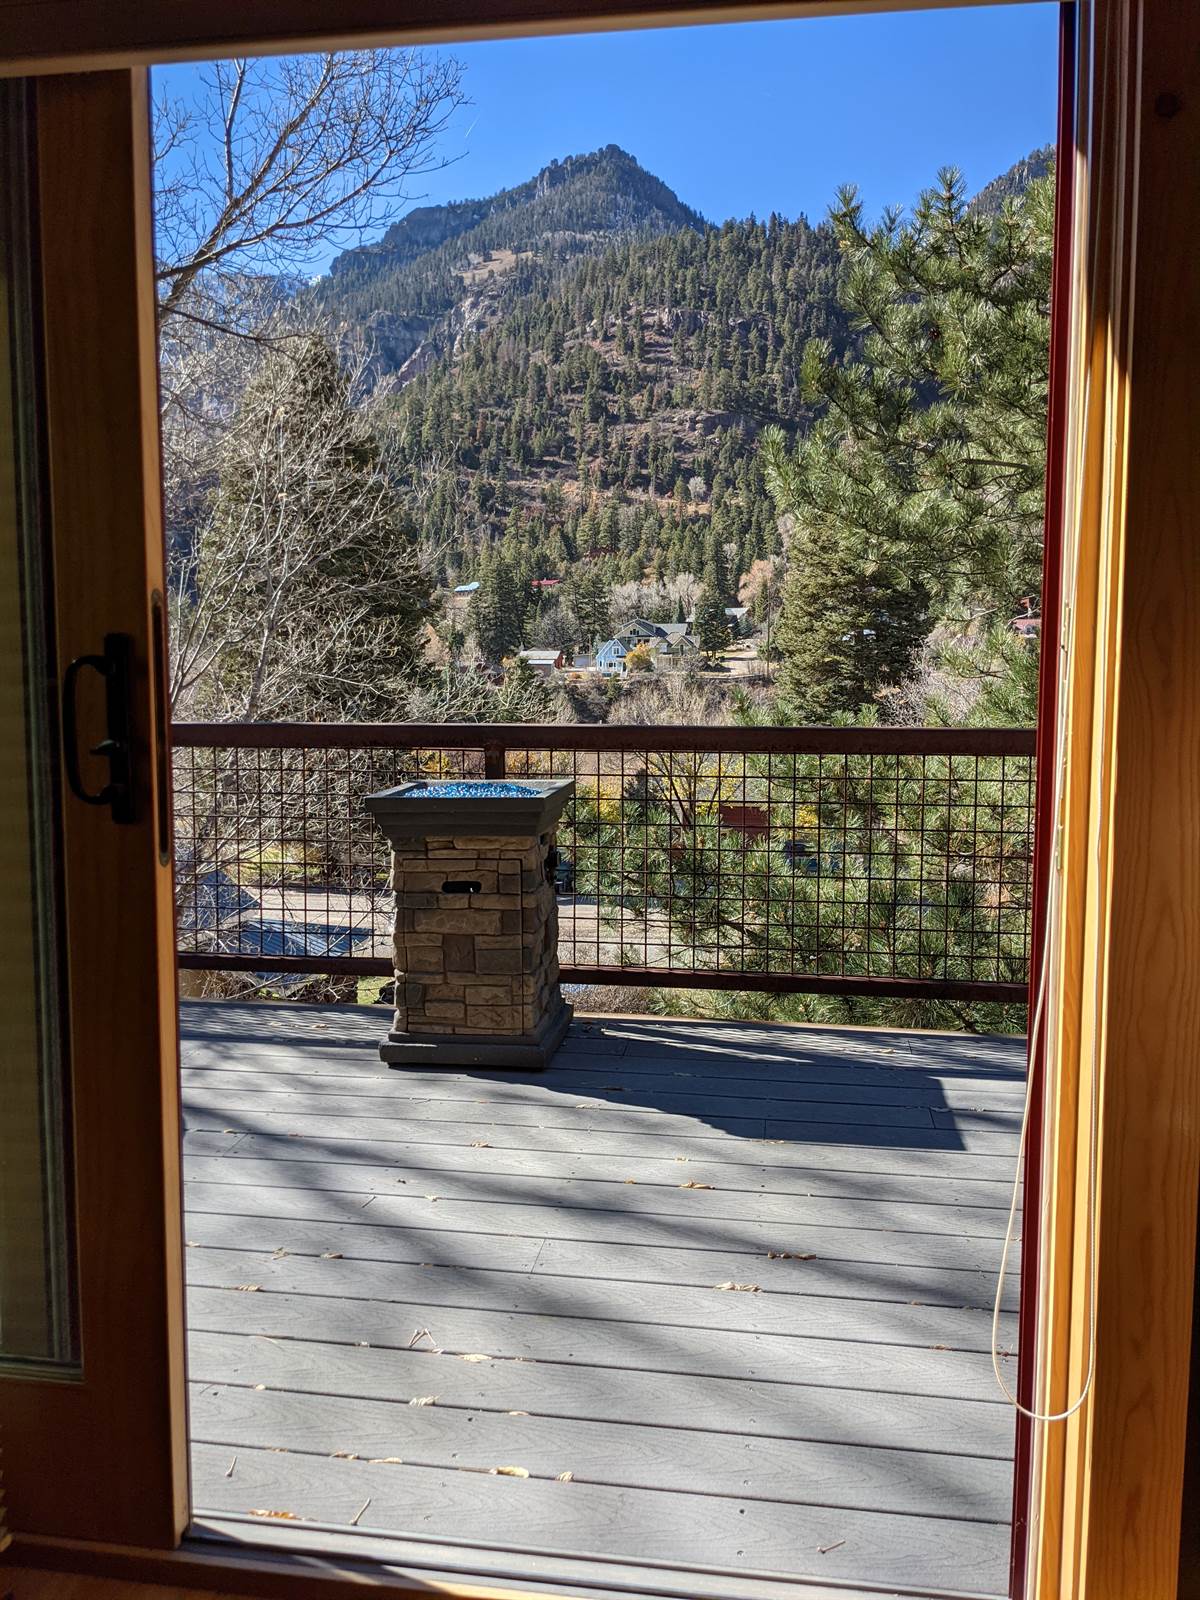 421 2nd Street, Ouray, CO 81427